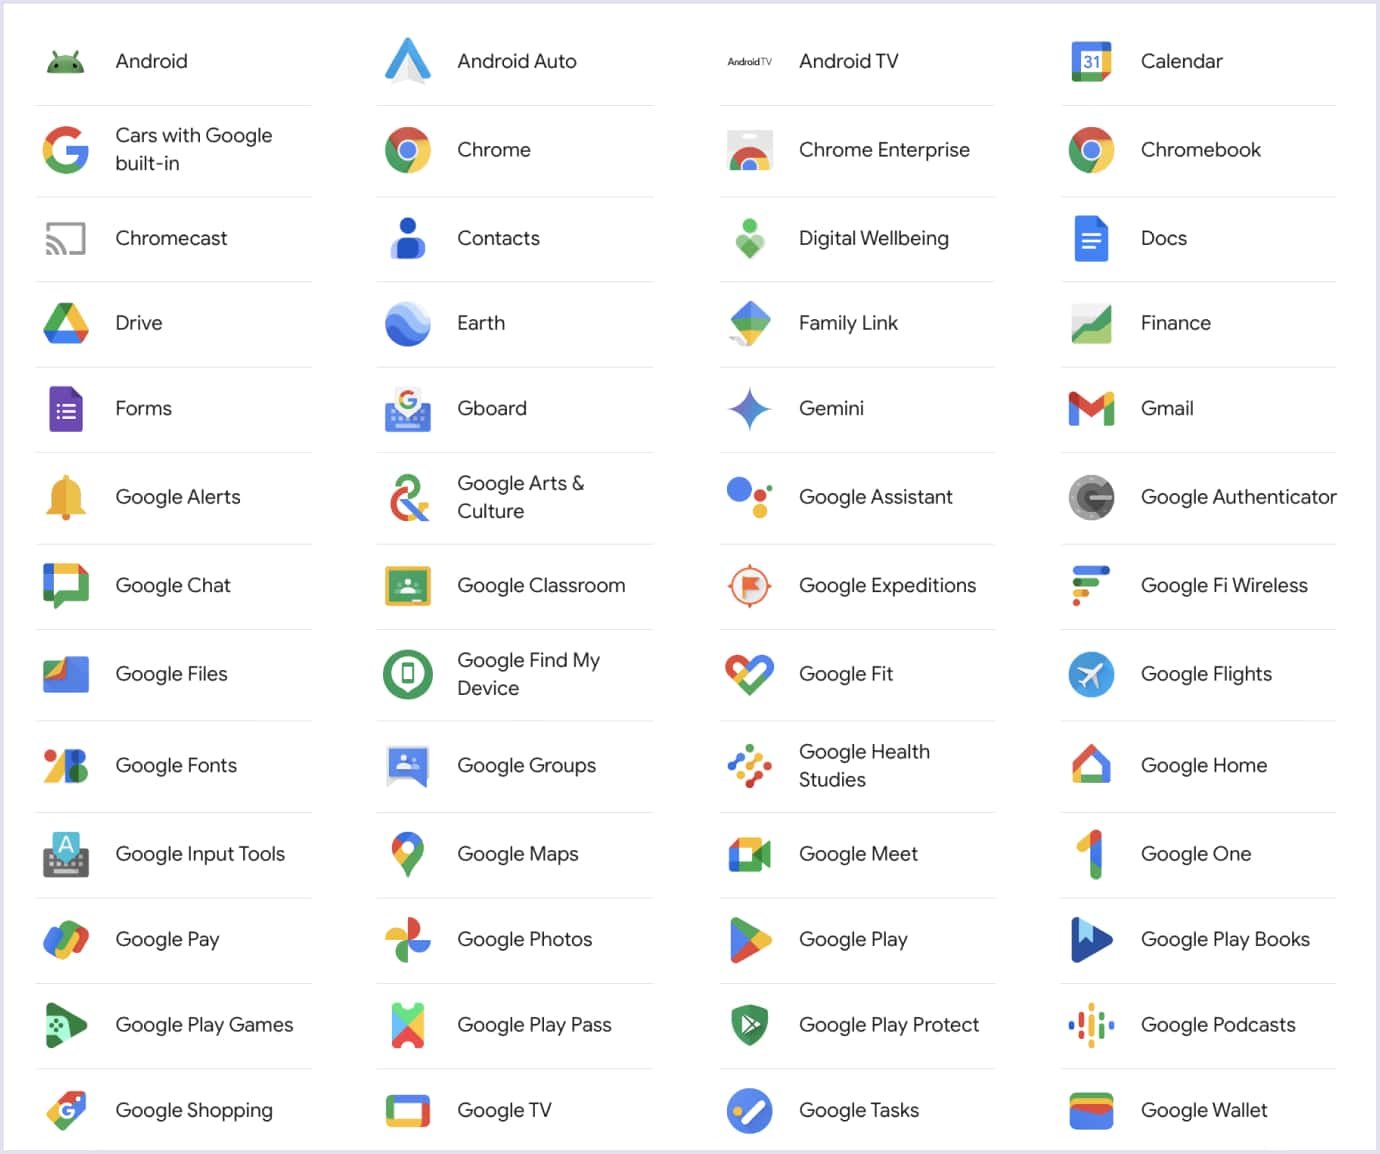 Google collaboration products